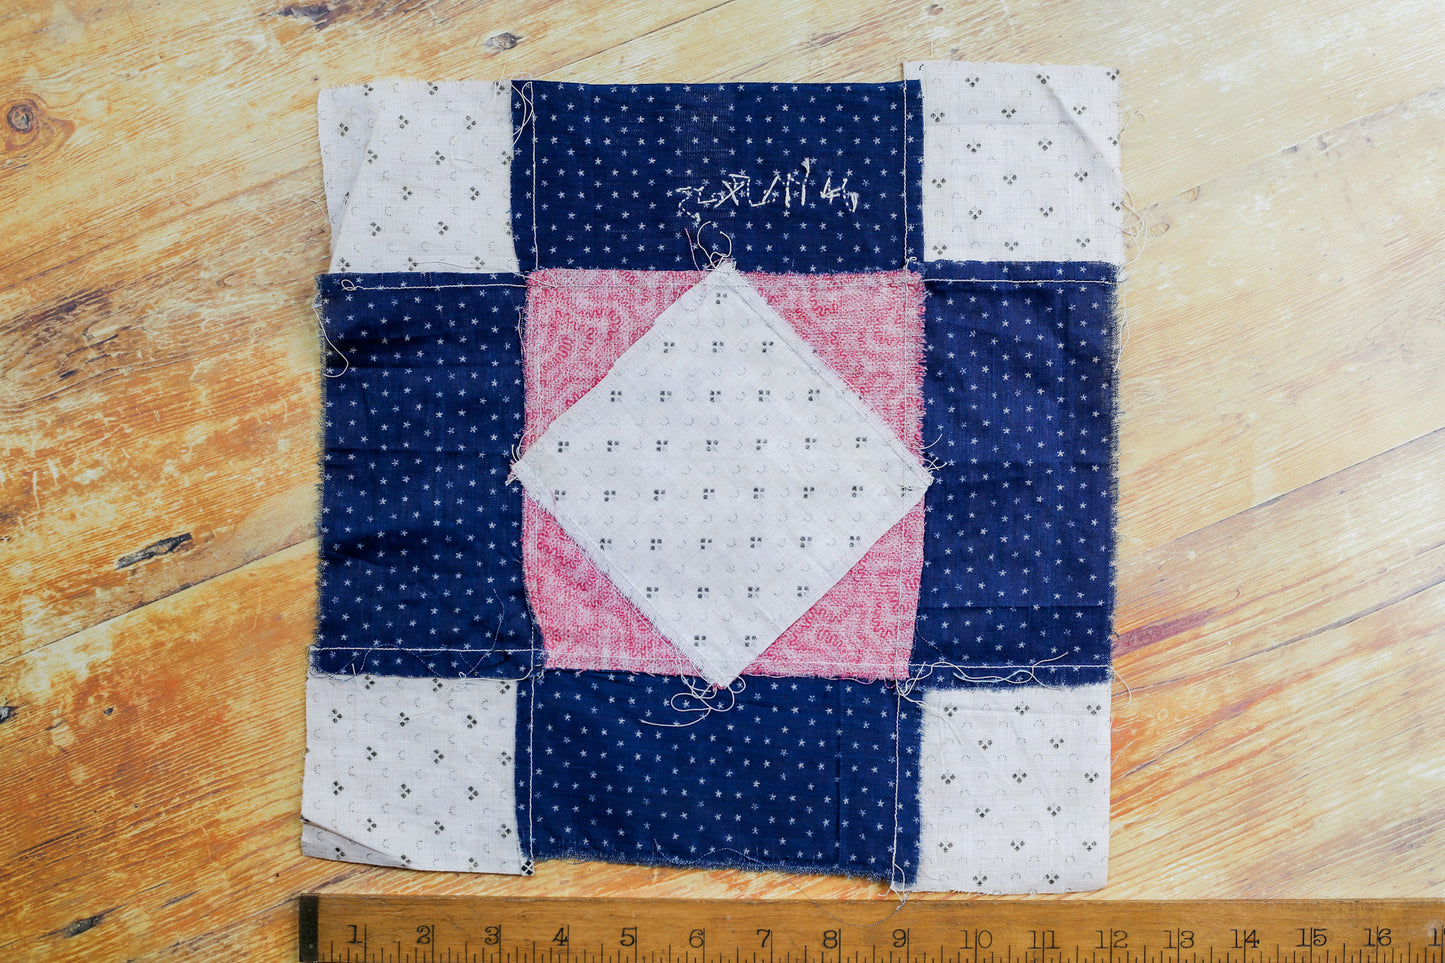 Antique Blue and Pink “H. Walters” Signed Quilt Block, c1910